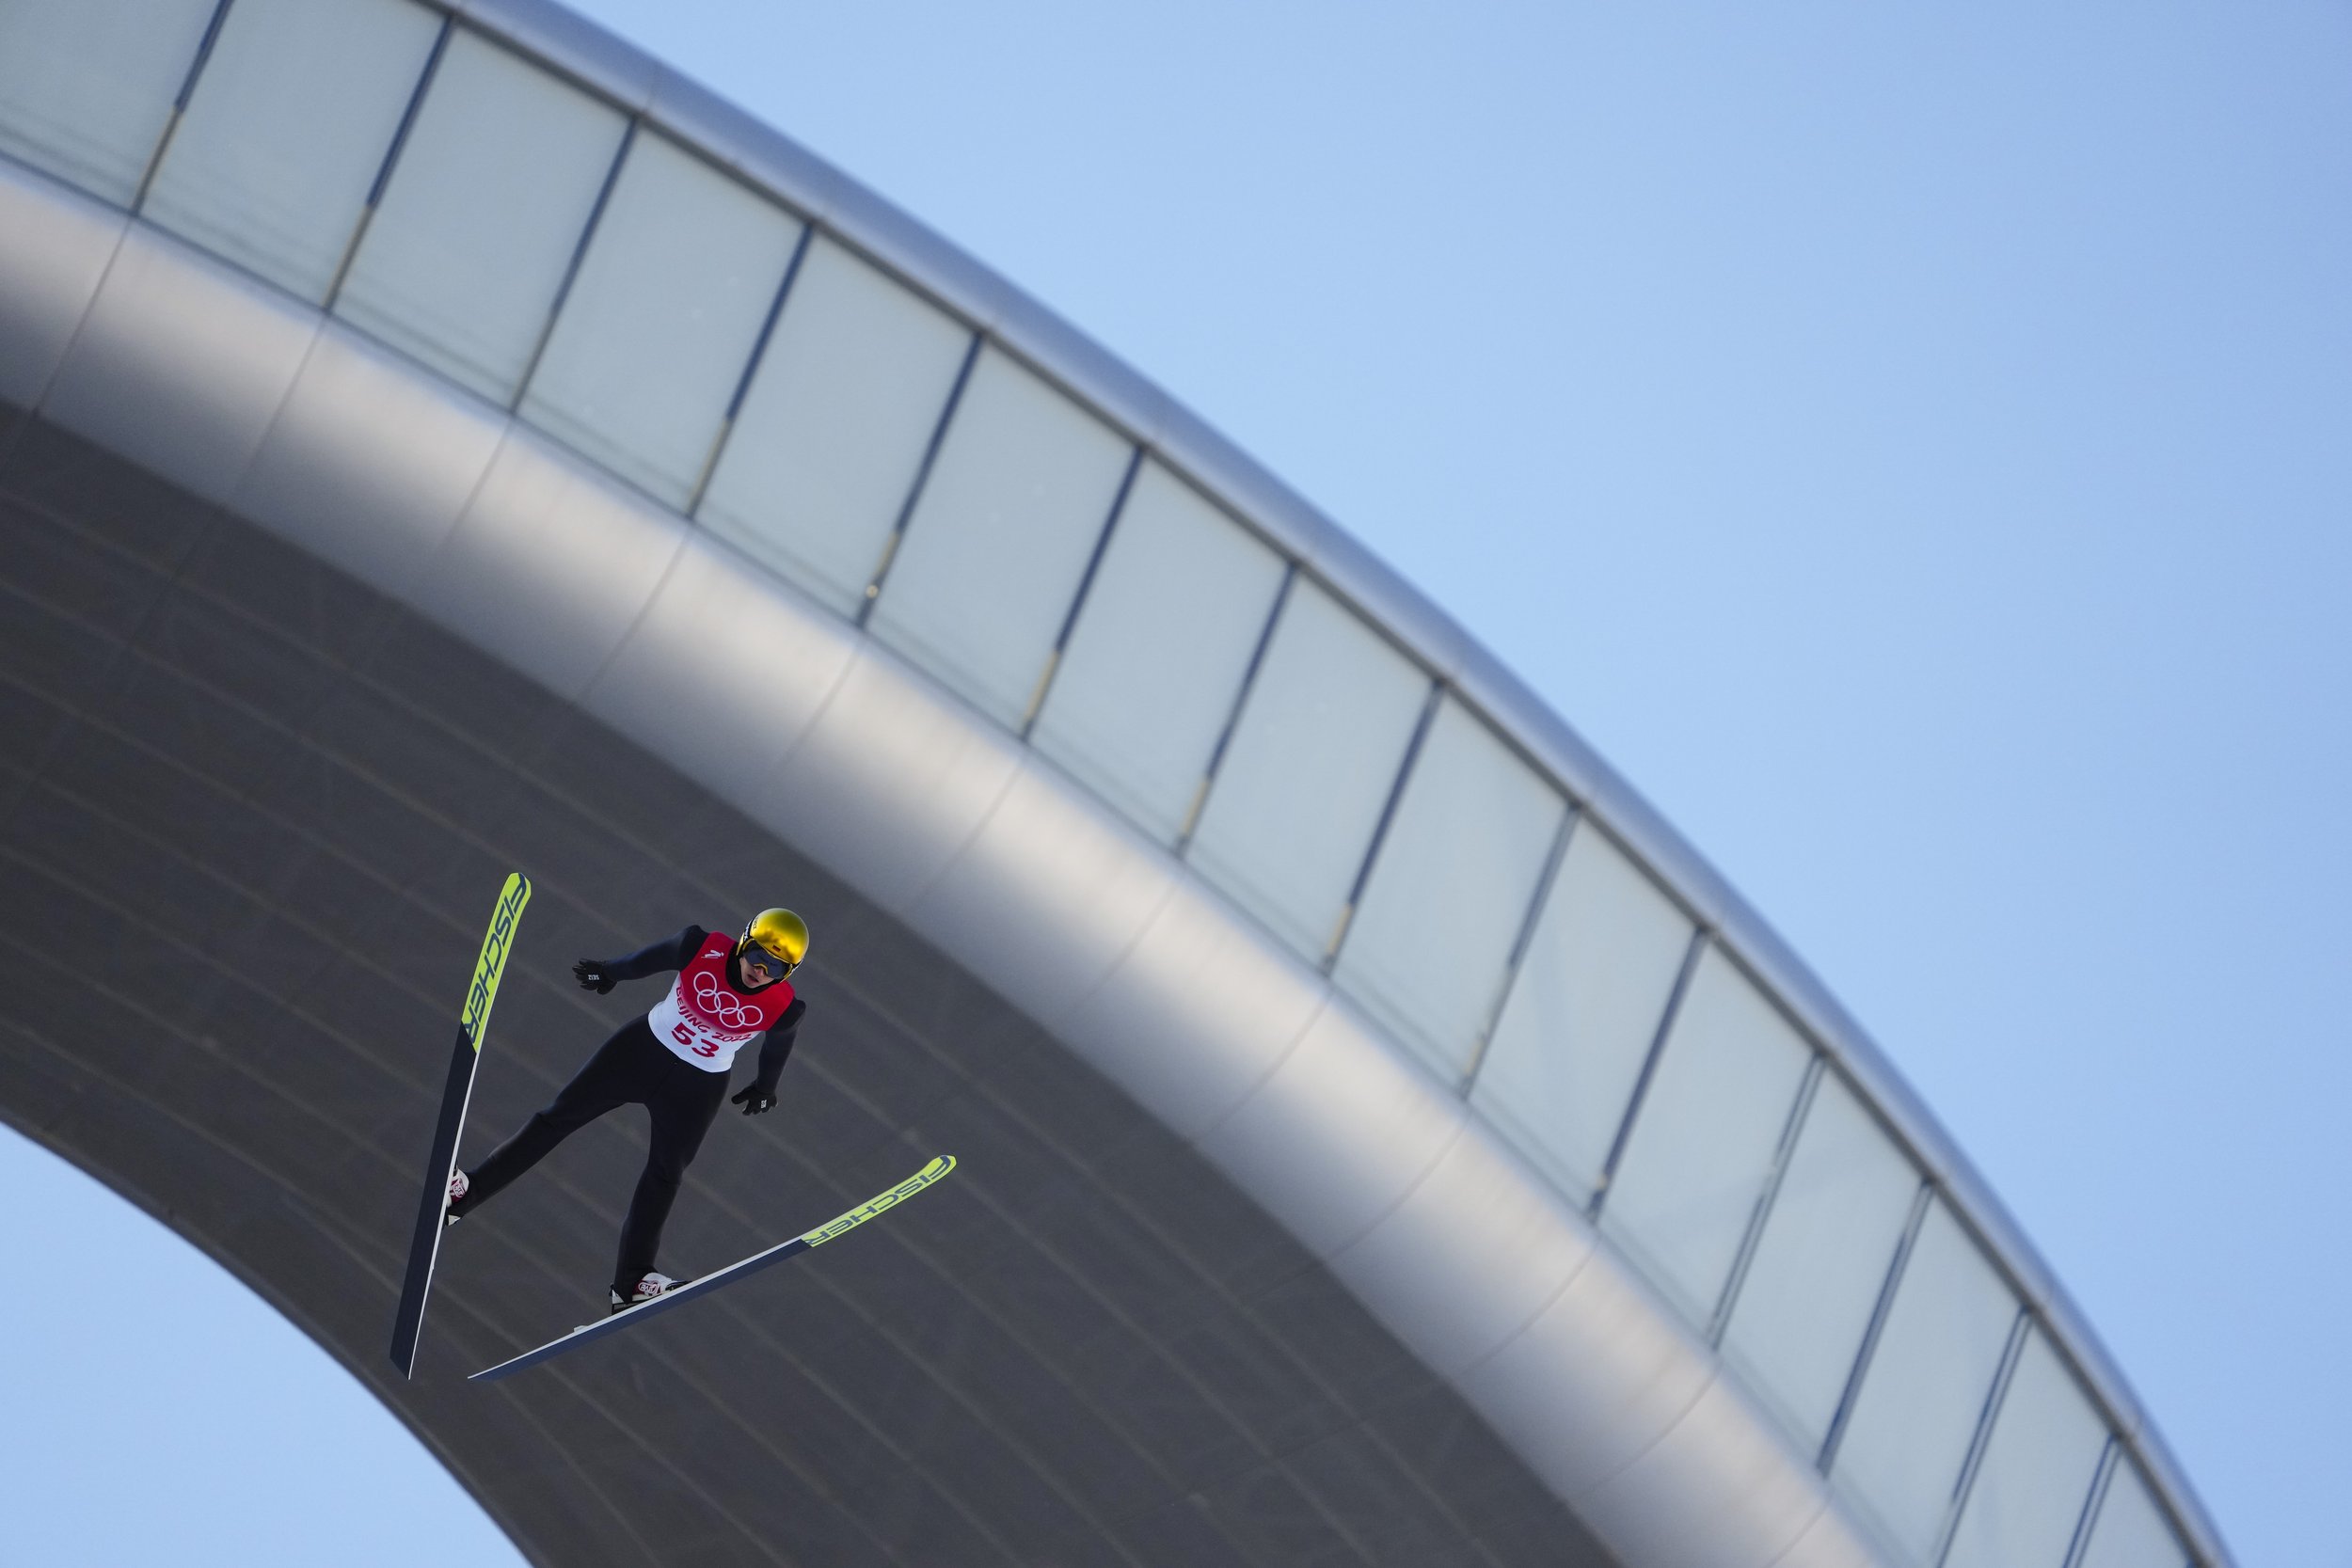  Karl Geiger, of Germany, soars through the air during the men's normal hill individual ski jumping qualification round at the 2022 Winter Olympics, Saturday, Feb. 5, 2022, in Zhangjiakou, China. (AP Photo/Matthias Schrader) 